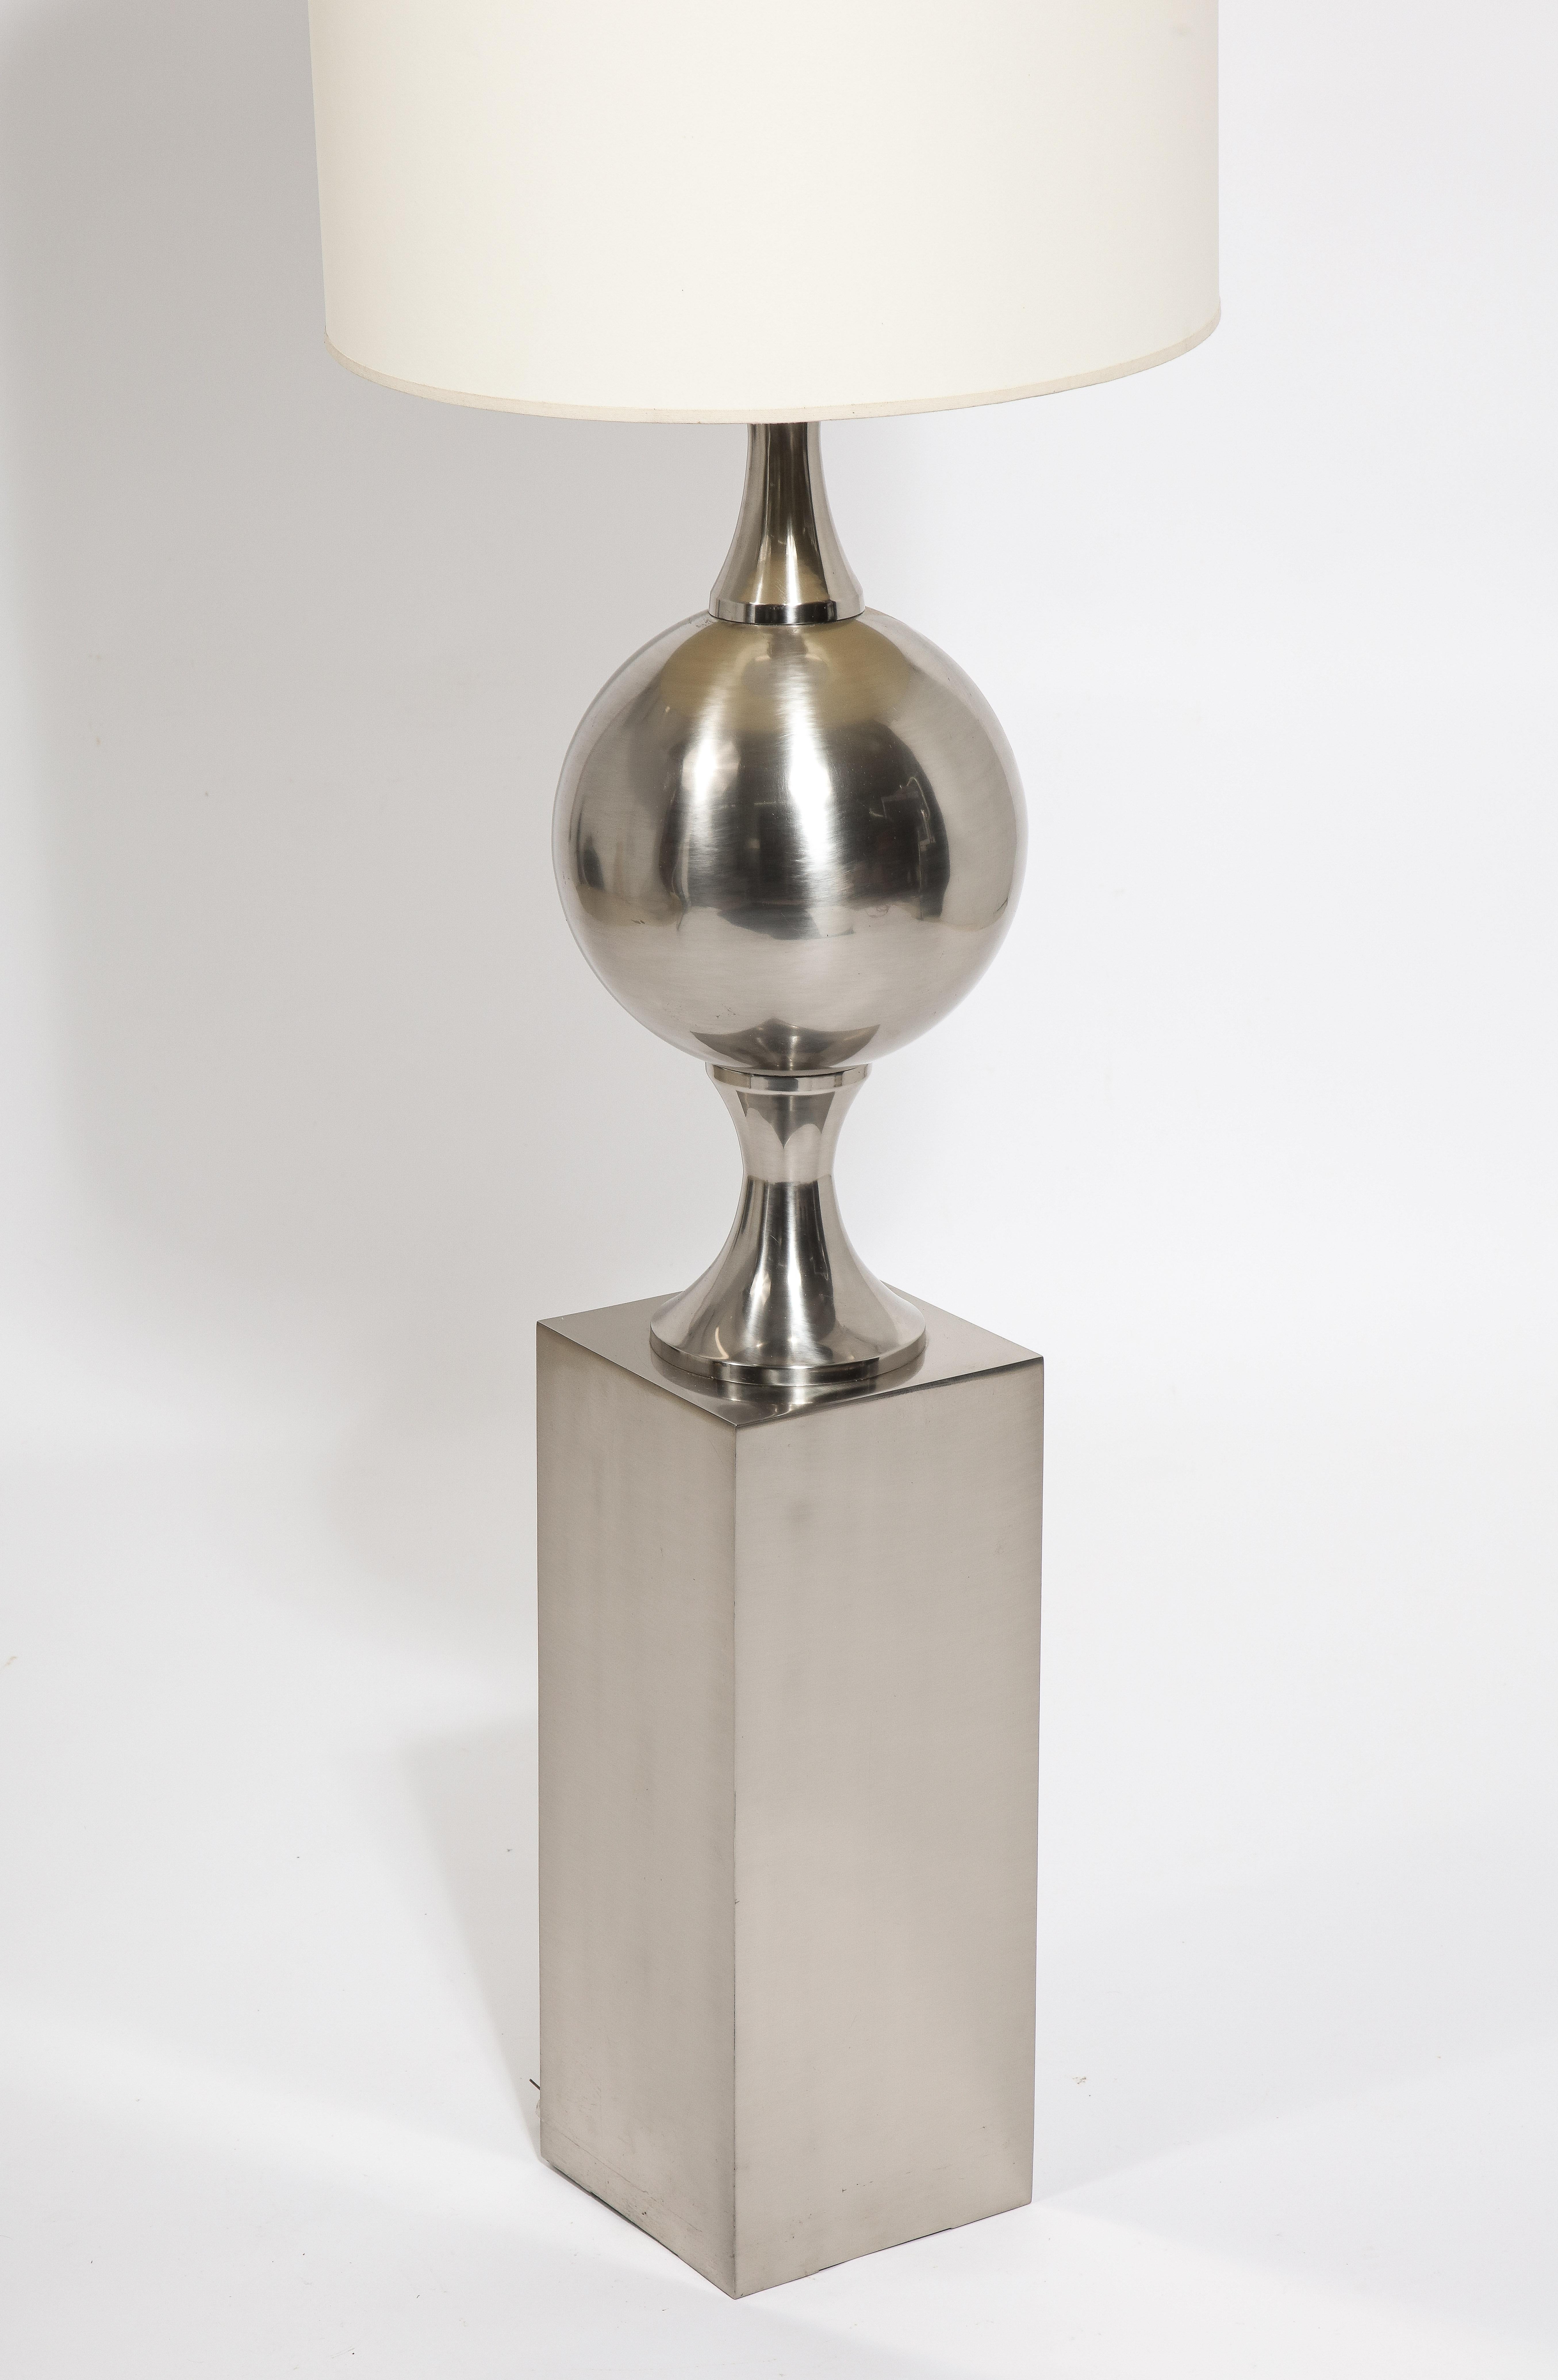 Barbier Floor Lamp in Nickel Plated Brass, France 1970's For Sale 1